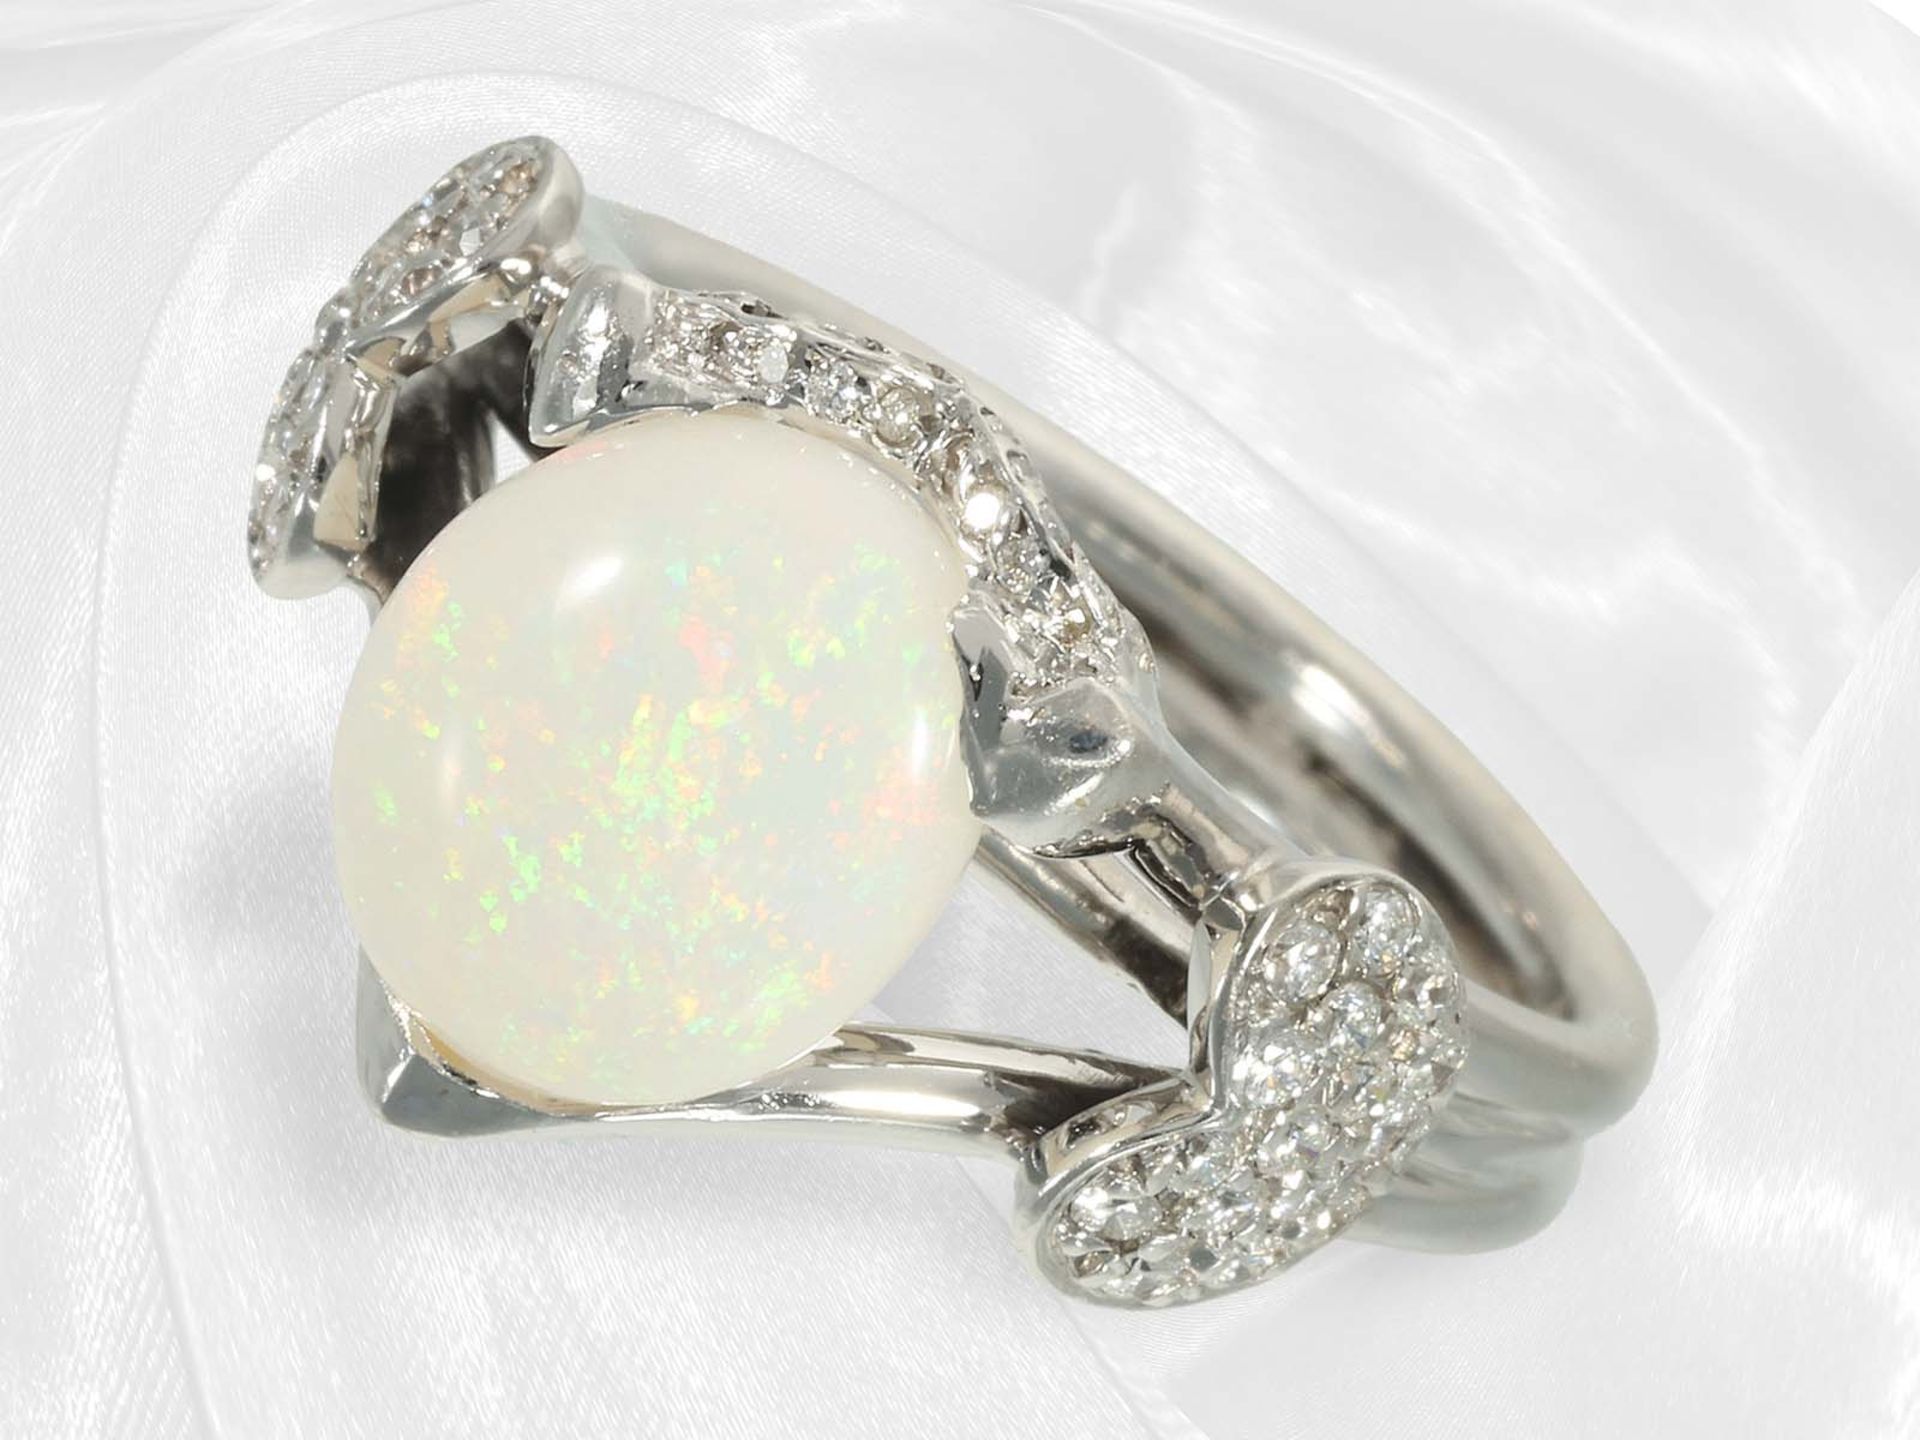 Fancy designer goldsmith ring with opal and brilliant-cut diamonds, "Hearts", 18K white gold, handma